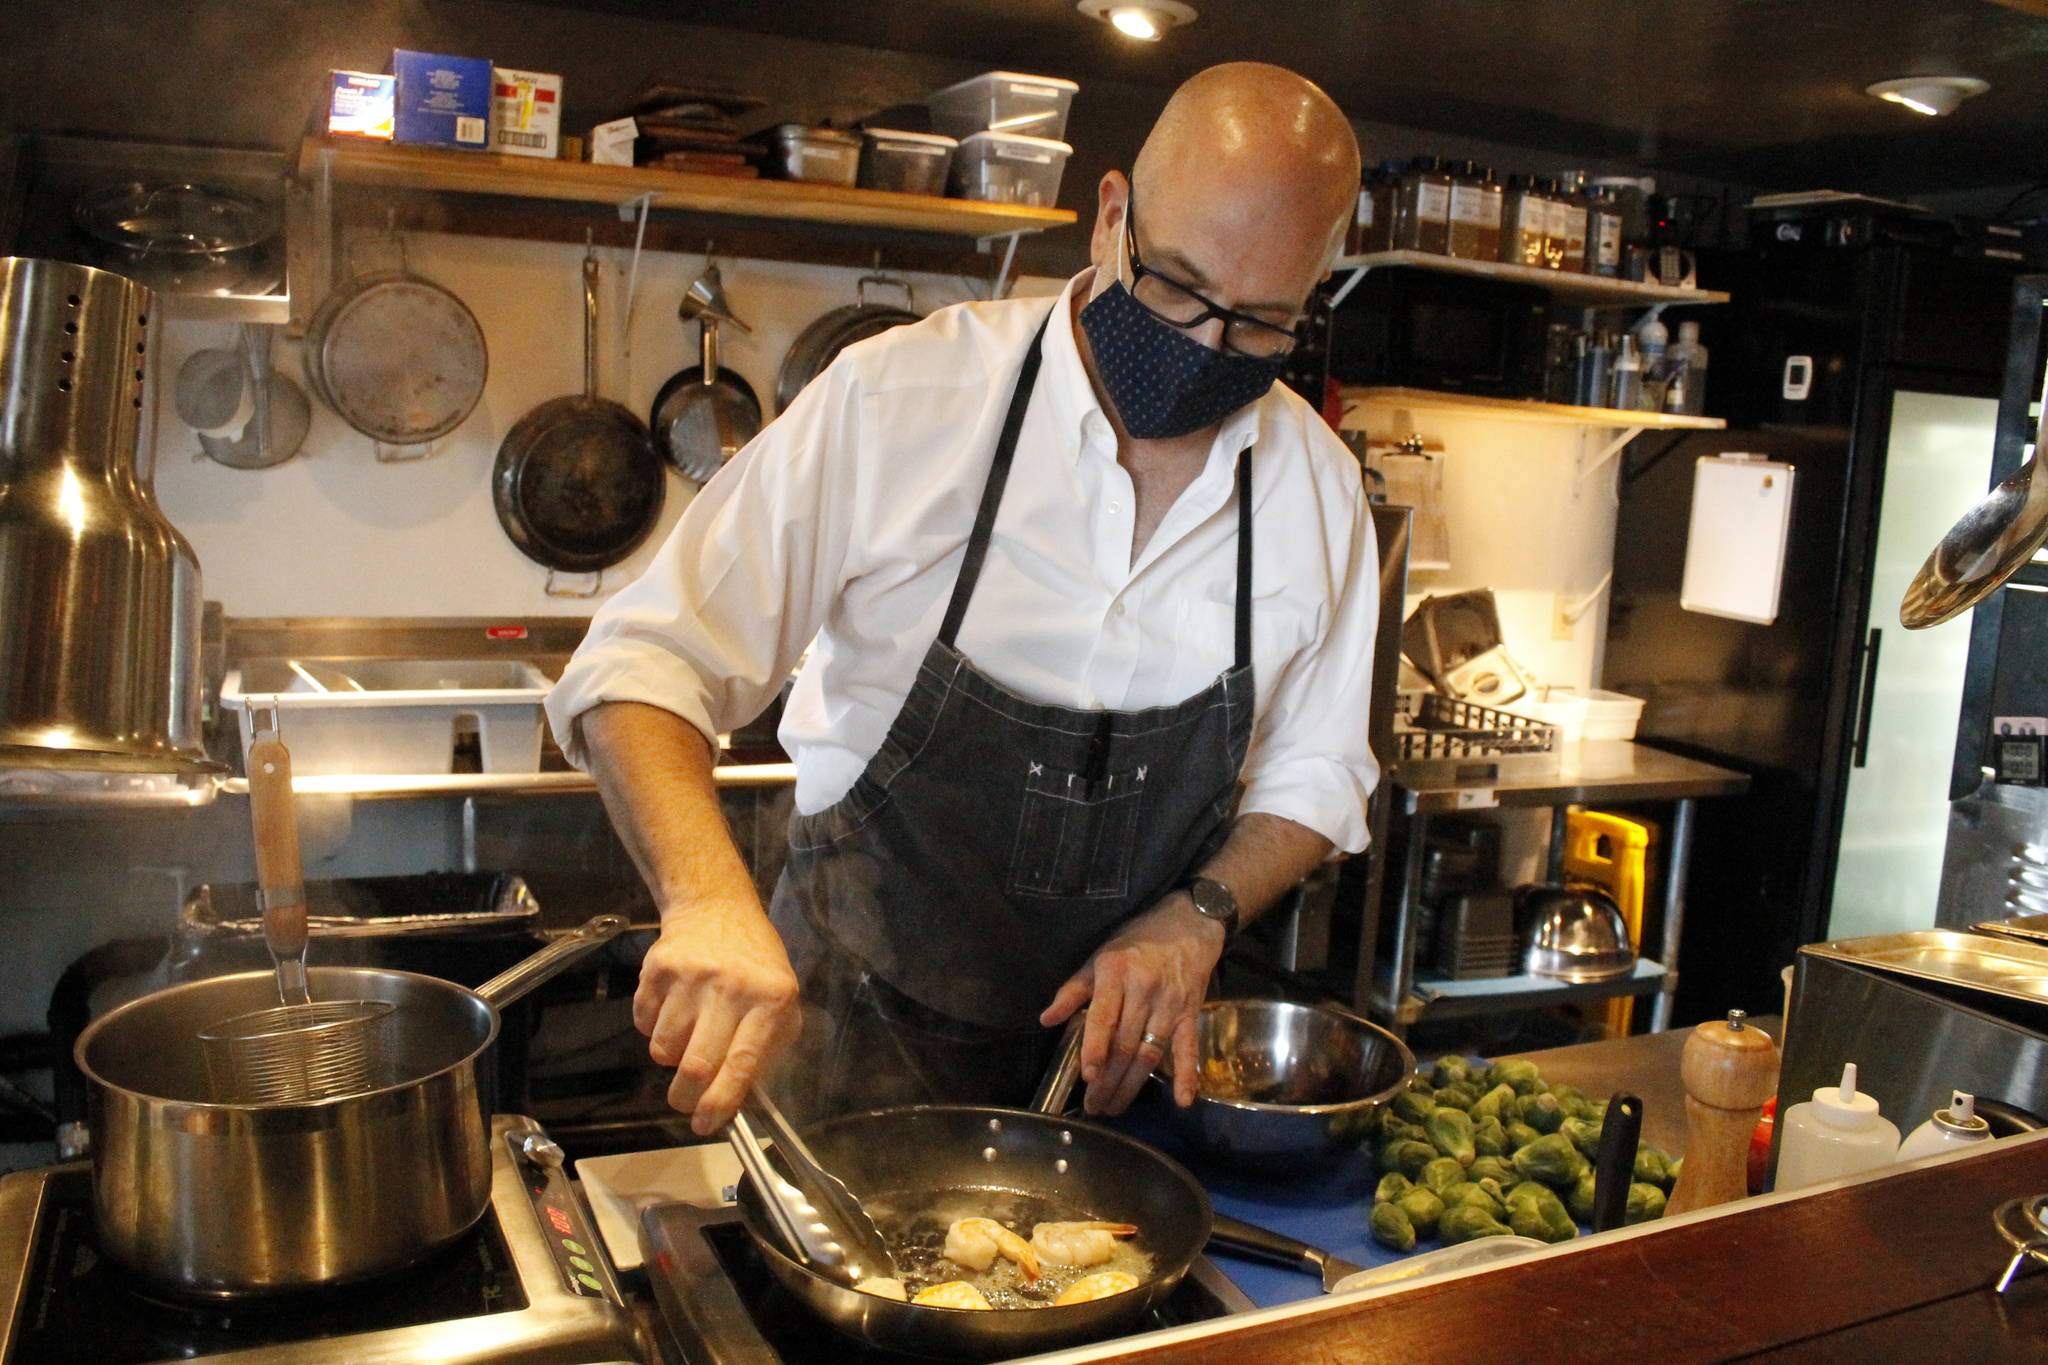 Stefen Bosworth, co-owner and chef of Savory, cooks up some squid ink linguine. (Photo by Kira Erickson/South Whidbey Record)